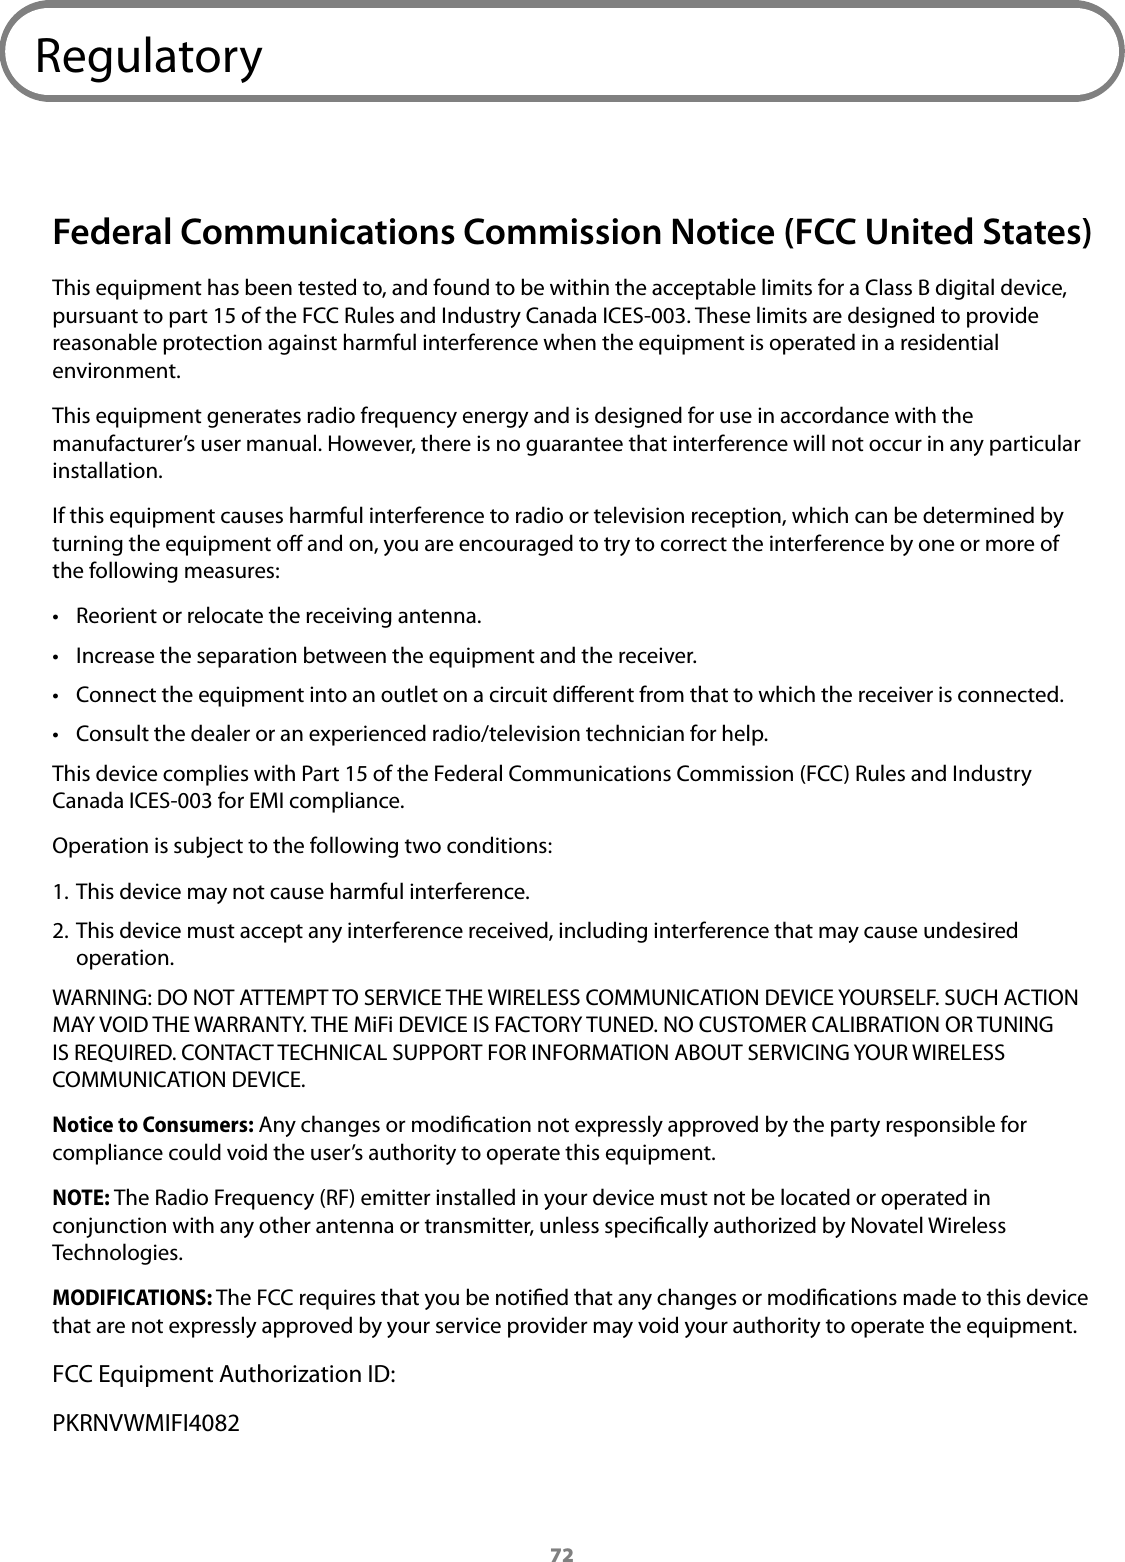 72RegulatoryFederal Communications Commission Notice (FCC United States)This equipment has been tested to, and found to be within the acceptable limits for a Class B digital device, pursuant to part 15 of the FCC Rules and Industry Canada ICES-003. These limits are designed to provide reasonable protection against harmful interference when the equipment is operated in a residential environment. This equipment generates radio frequency energy and is designed for use in accordance with the manufacturer’s user manual. However, there is no guarantee that interference will not occur in any particular installation. If this equipment causes harmful interference to radio or television reception, which can be determined by turning the equipment o and on, you are encouraged to try to correct the interference by one or more of the following measures:• Reorient or relocate the receiving antenna.• Increase the separation between the equipment and the receiver.• Connect the equipment into an outlet on a circuit dierent from that to which the receiver is connected.• Consult the dealer or an experienced radio/television technician for help.This device complies with Part 15 of the Federal Communications Commission (FCC) Rules and Industry Canada ICES-003 for EMI compliance.Operation is subject to the following two conditions:1. This device may not cause harmful interference.2. This device must accept any interference received, including interference that may cause undesired operation.WARNING: DO NOT ATTEMPT TO SERVICE THE WIRELESS COMMUNICATION DEVICE YOURSELF. SUCH ACTION MAY VOID THE WARRANTY. THE MiFi DEVICE IS FACTORY TUNED. NO CUSTOMER CALIBRATION OR TUNING IS REQUIRED. CONTACT TECHNICAL SUPPORT FOR INFORMATION ABOUT SERVICING YOUR WIRELESS COMMUNICATION DEVICE.Notice to Consumers: Any changes or modication not expressly approved by the party responsible for compliance could void the user’s authority to operate this equipment.NOTE: The Radio Frequency (RF) emitter installed in your device must not be located or operated in conjunction with any other antenna or transmitter, unless specically authorized by Novatel Wireless Technologies.MODIFICATIONS: The FCC requires that you be notied that any changes or modications made to this device that are not expressly approved by your service provider may void your authority to operate the equipment.FCC Equipment Authorization ID:PKRNVWMIFI4082